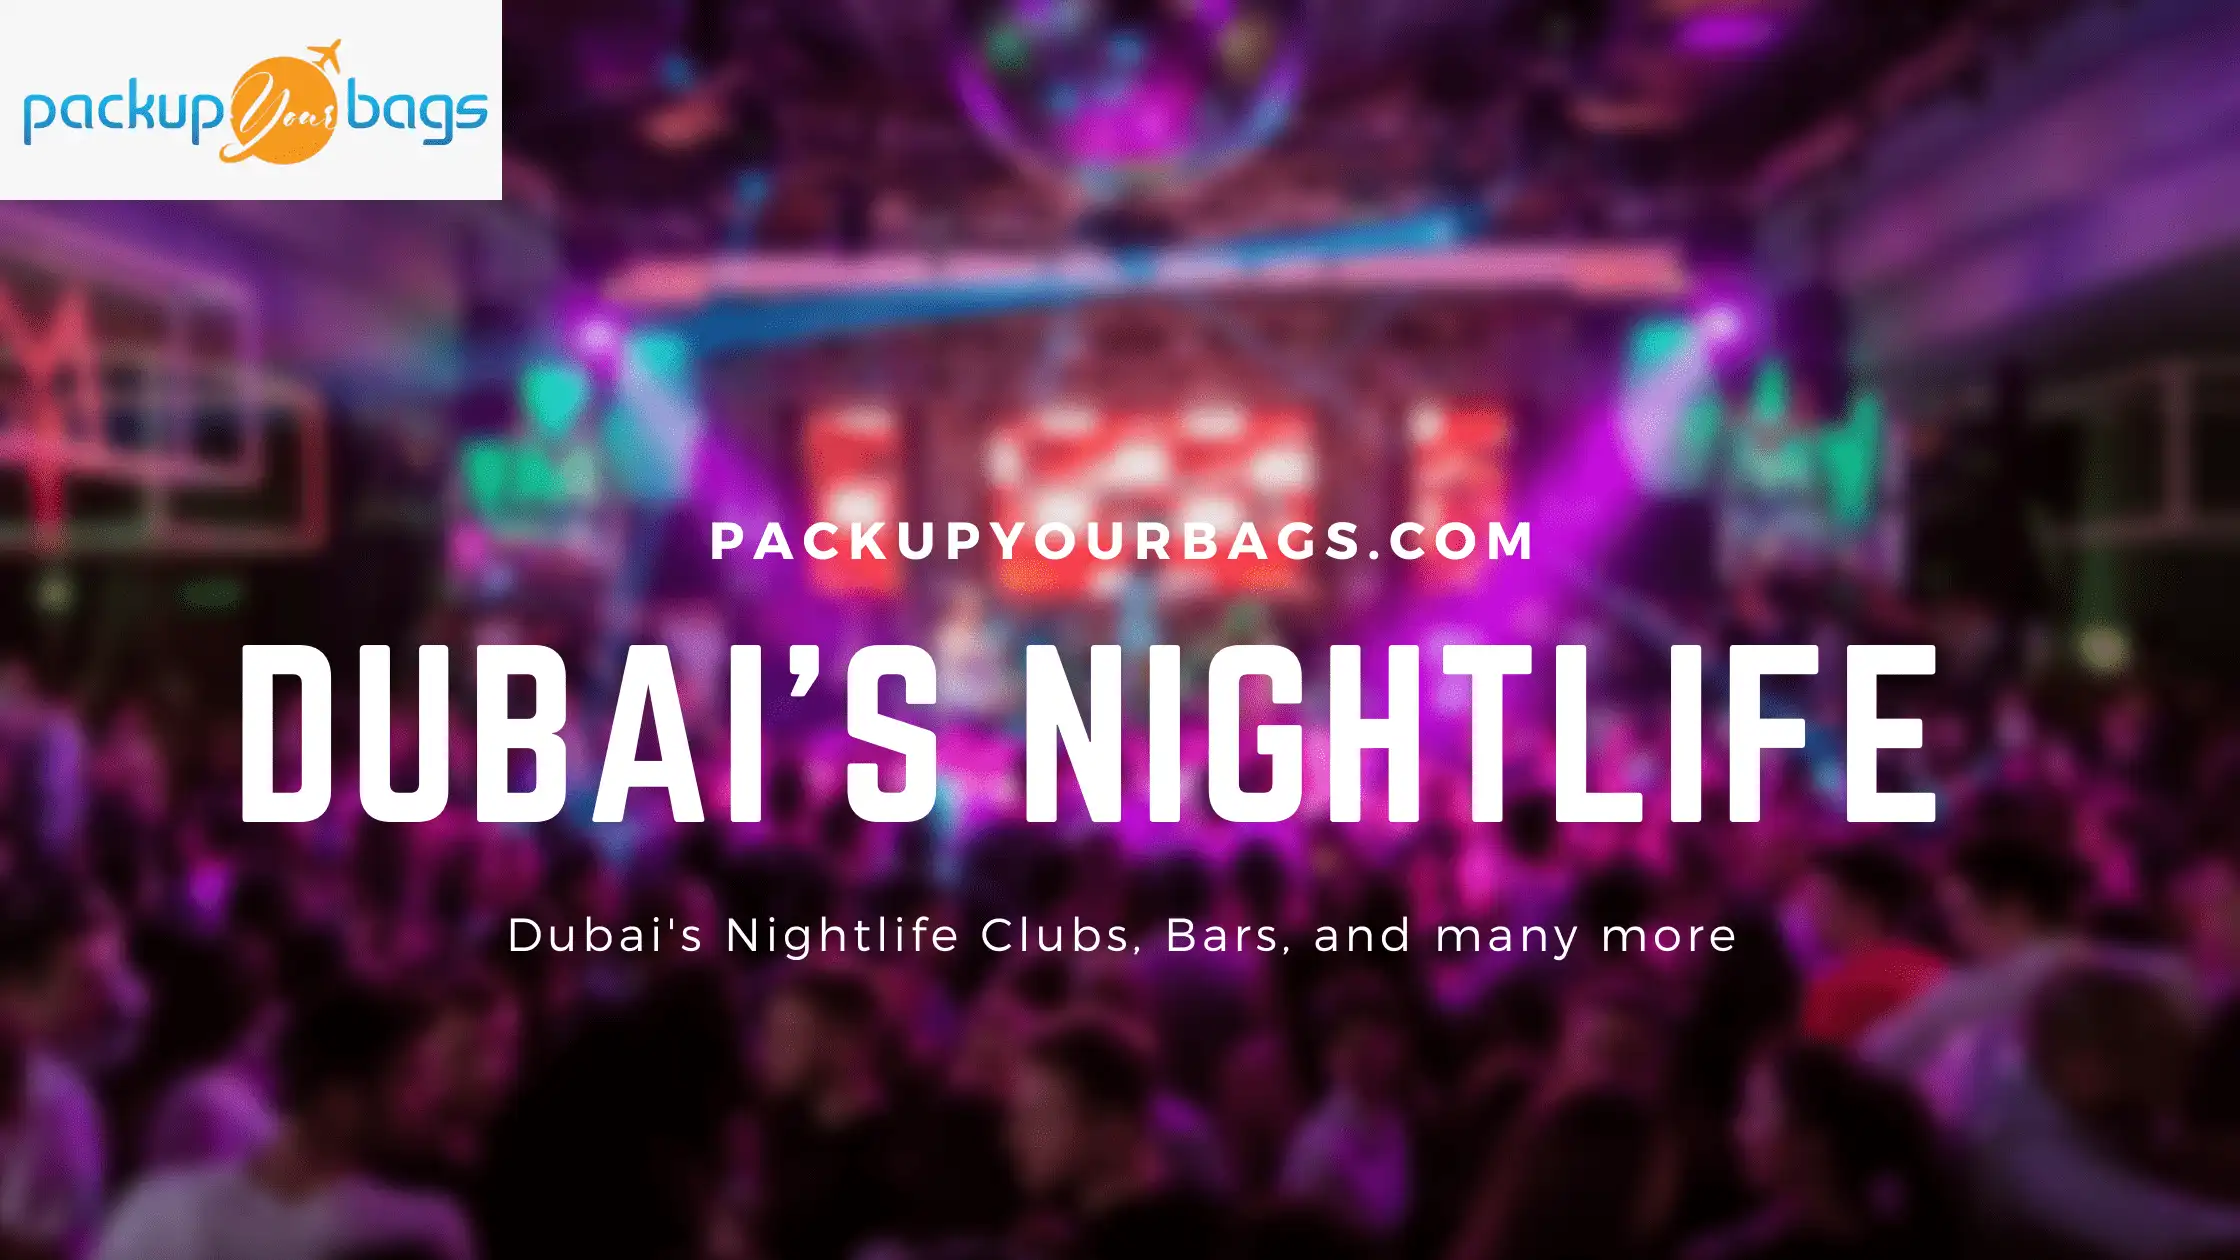 Dubai's Nightlife: Clubs, Bars, and many more